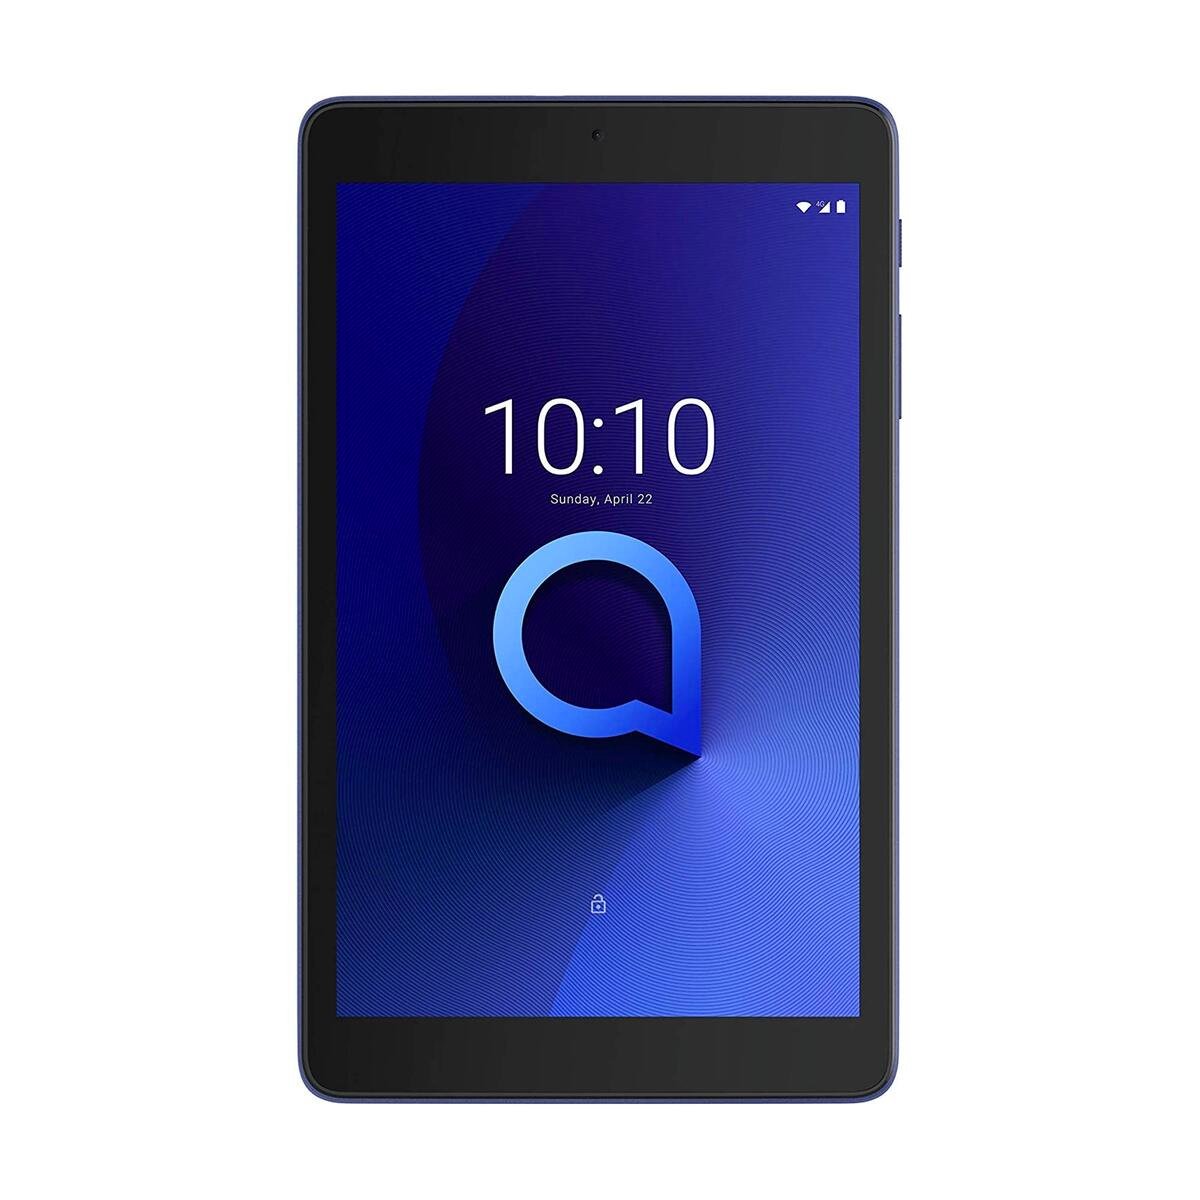 Alcatel Tablet 3T 8, Quad-Core, 3GB RAM, 32GB Memory, 8.0" Display, Android Oreo, 4G, Suede Blue